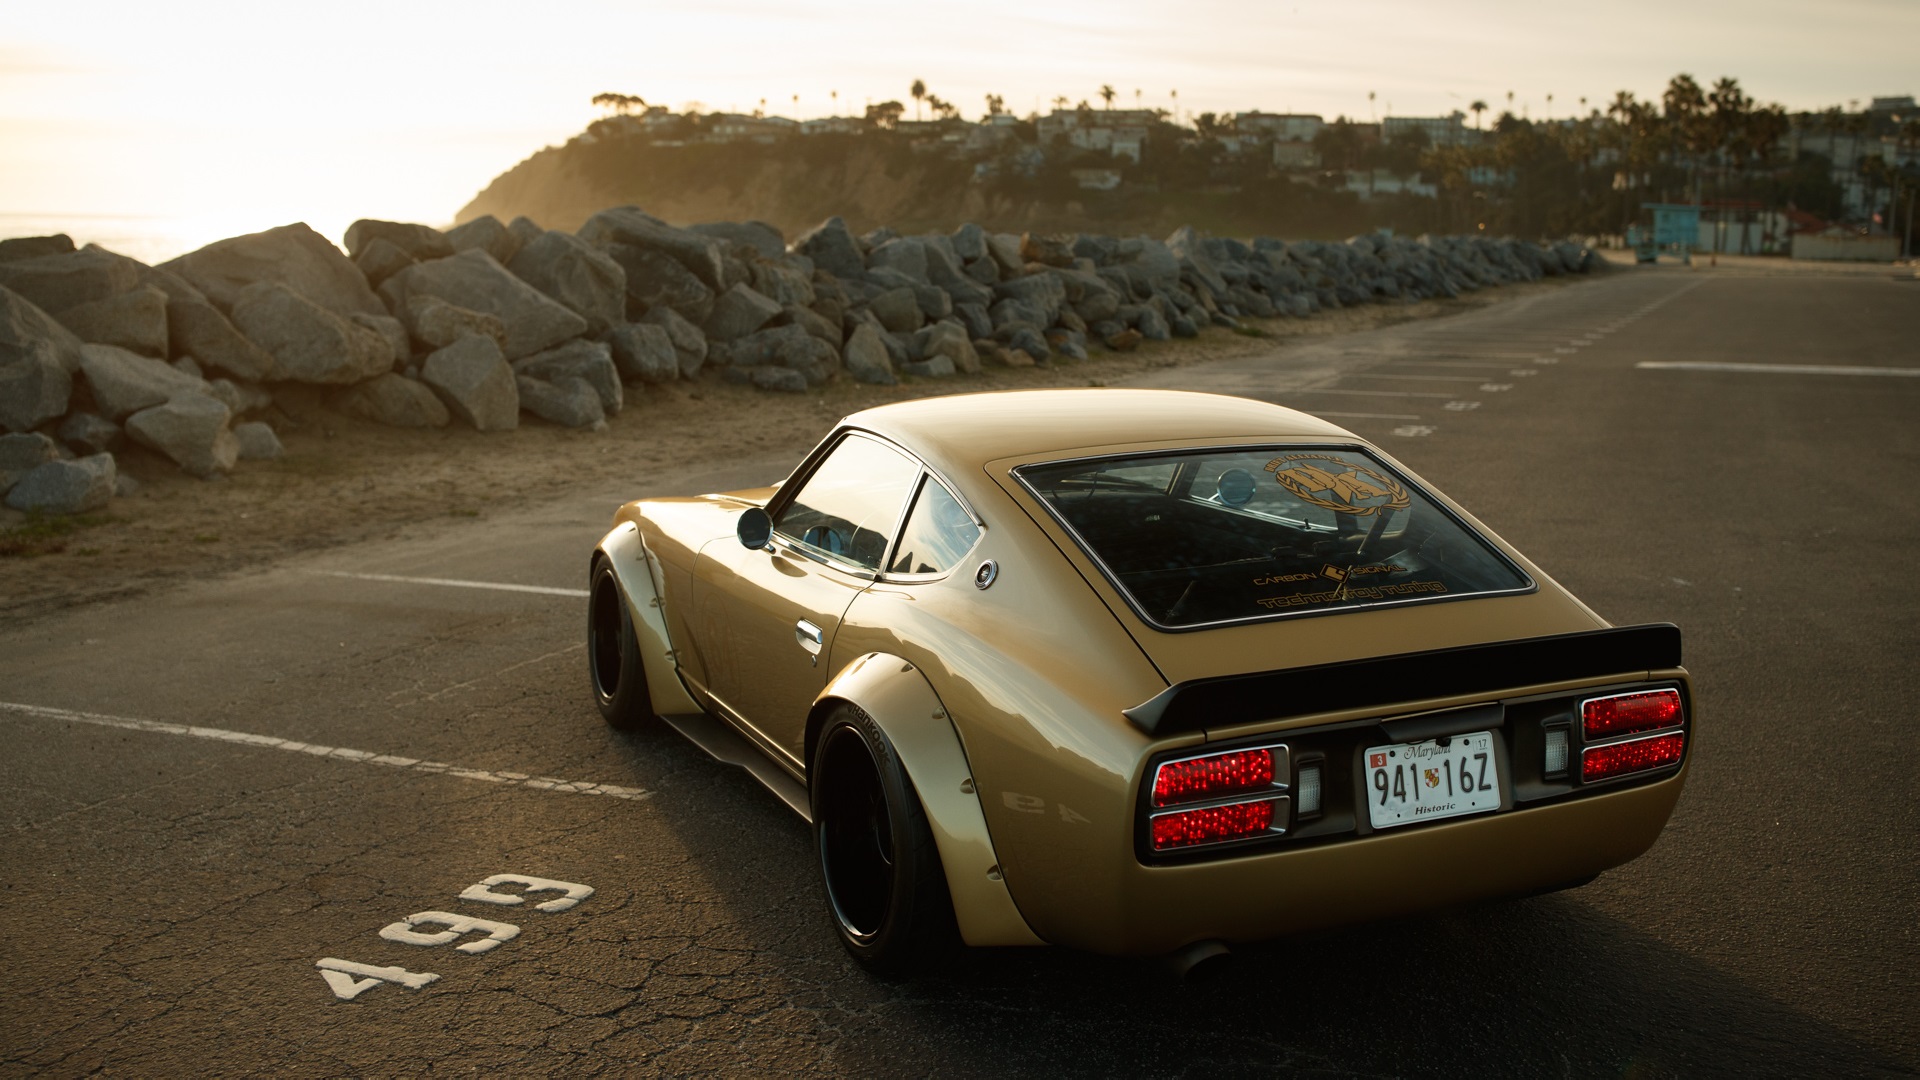 Car Speedhunters Numbers Vehicle Nissan Fairlady Z Nissan S30 Bolt On Fender Flares 1920x1080